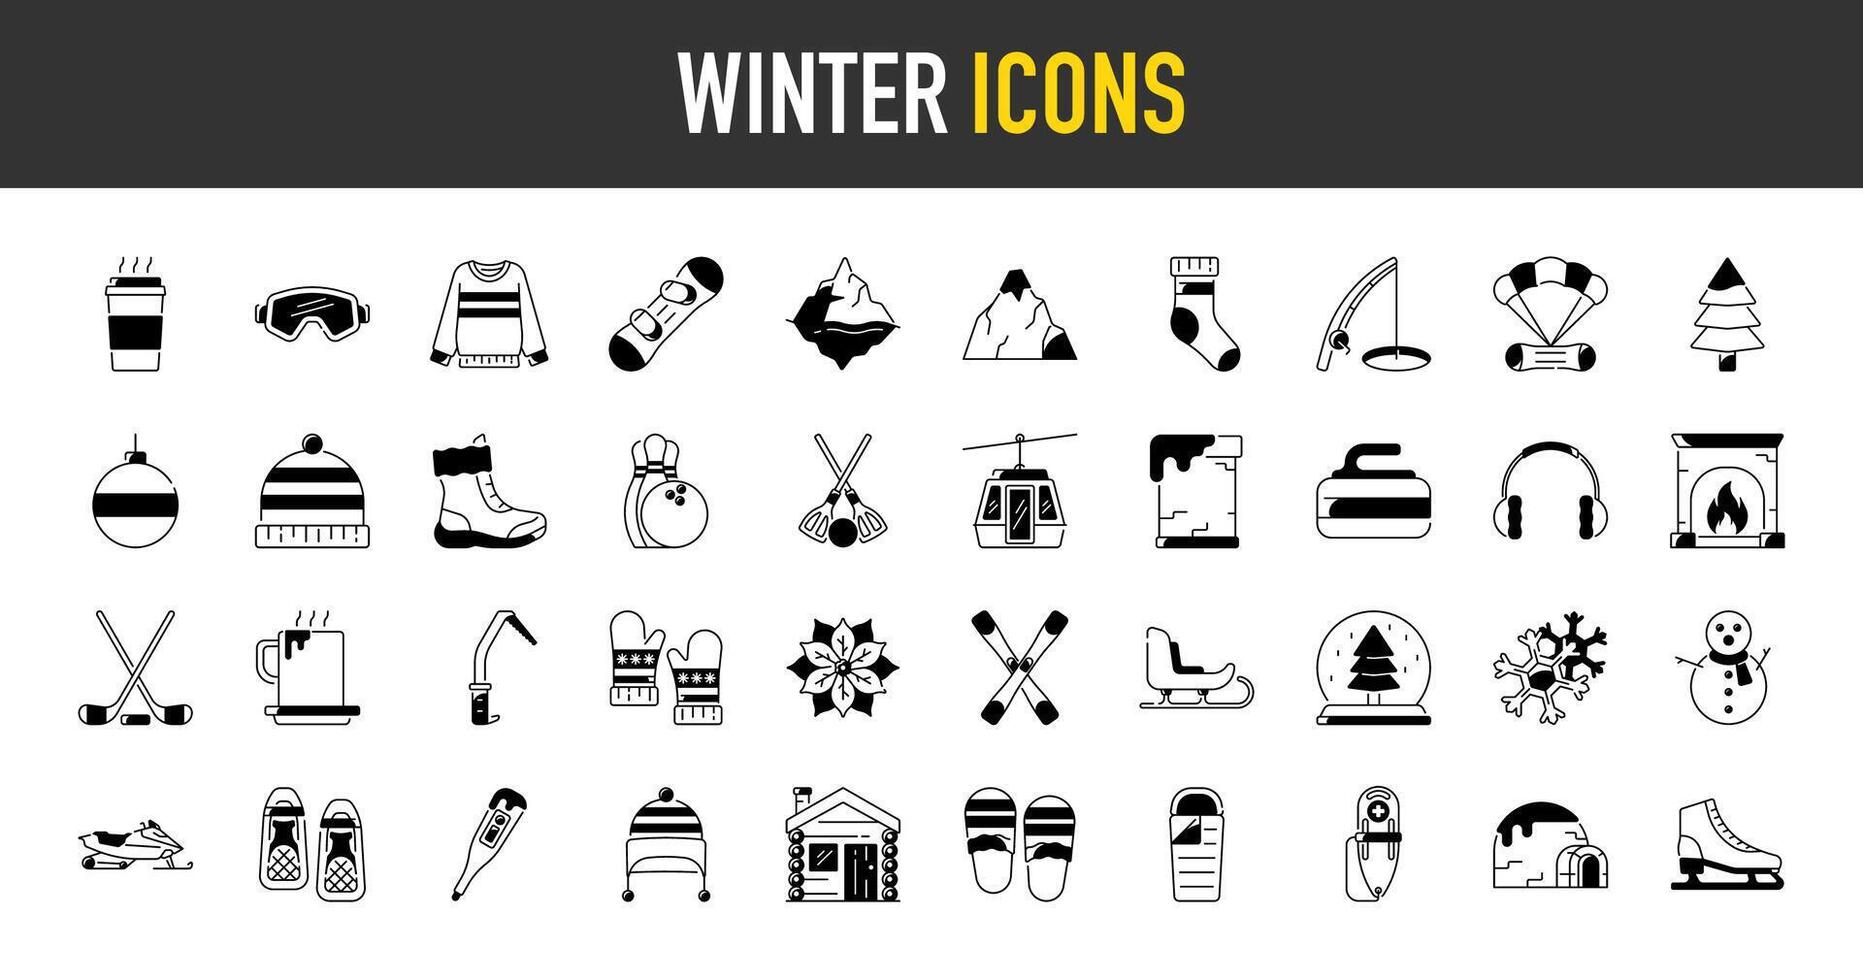 Set of winter activity icons. Such as snowman, winter sports, fashion, sweater, snow ride, Igloo, coffee, skating, ropeway, thermometer and more icon illustration vector